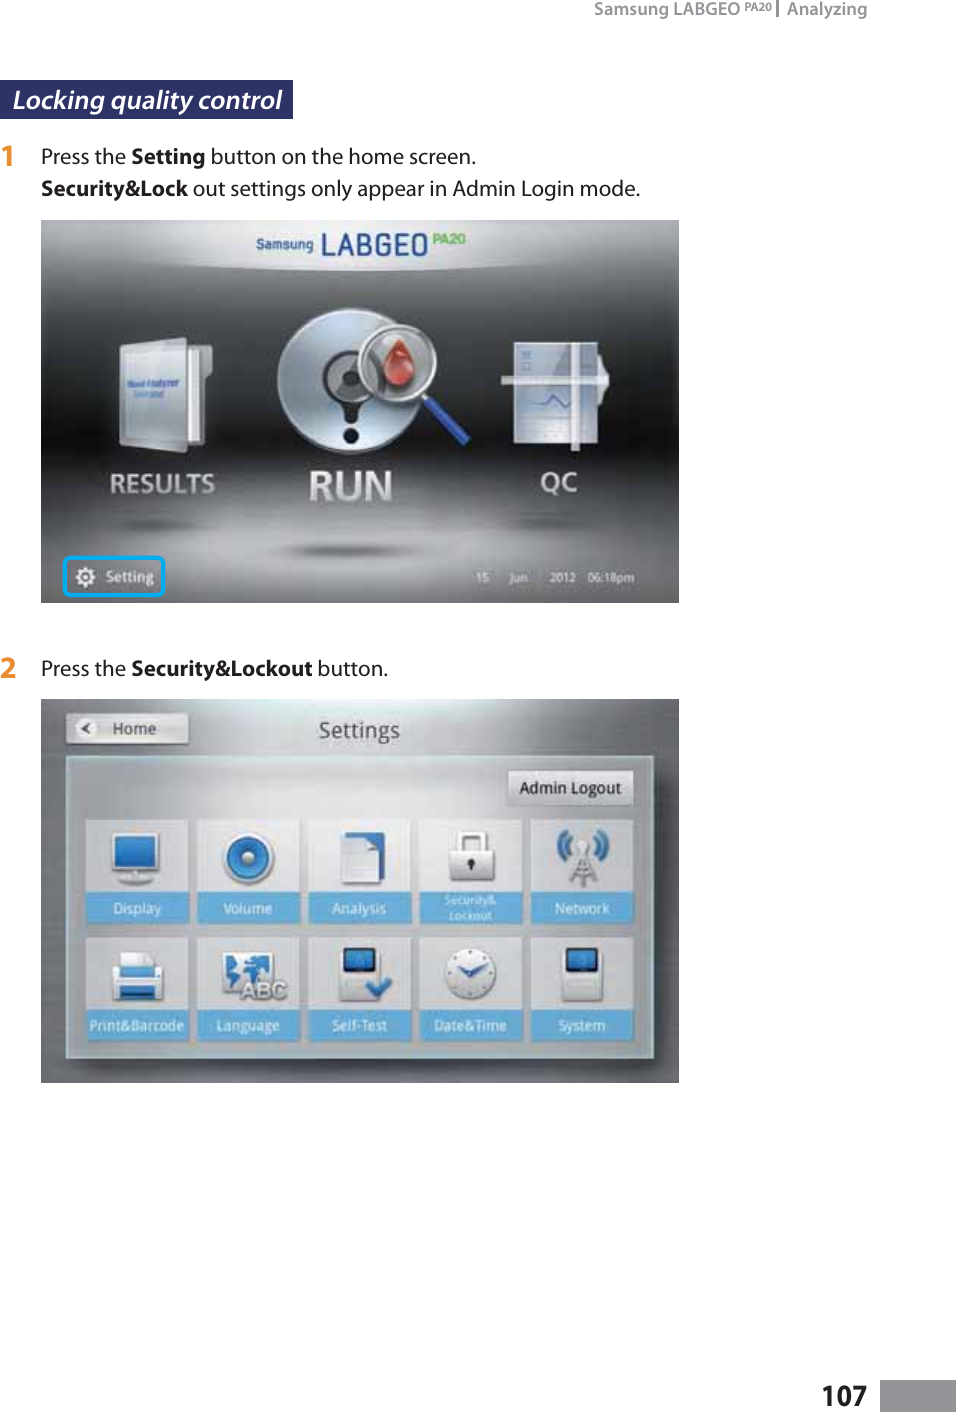 107Samsung LABGEO PA20   AnalyzingLocking quality control 1  Press the Setting button on the home screen.Security&amp;Lock out settings only appear in Admin Login mode.2  Press the Security&amp;Lockout button.